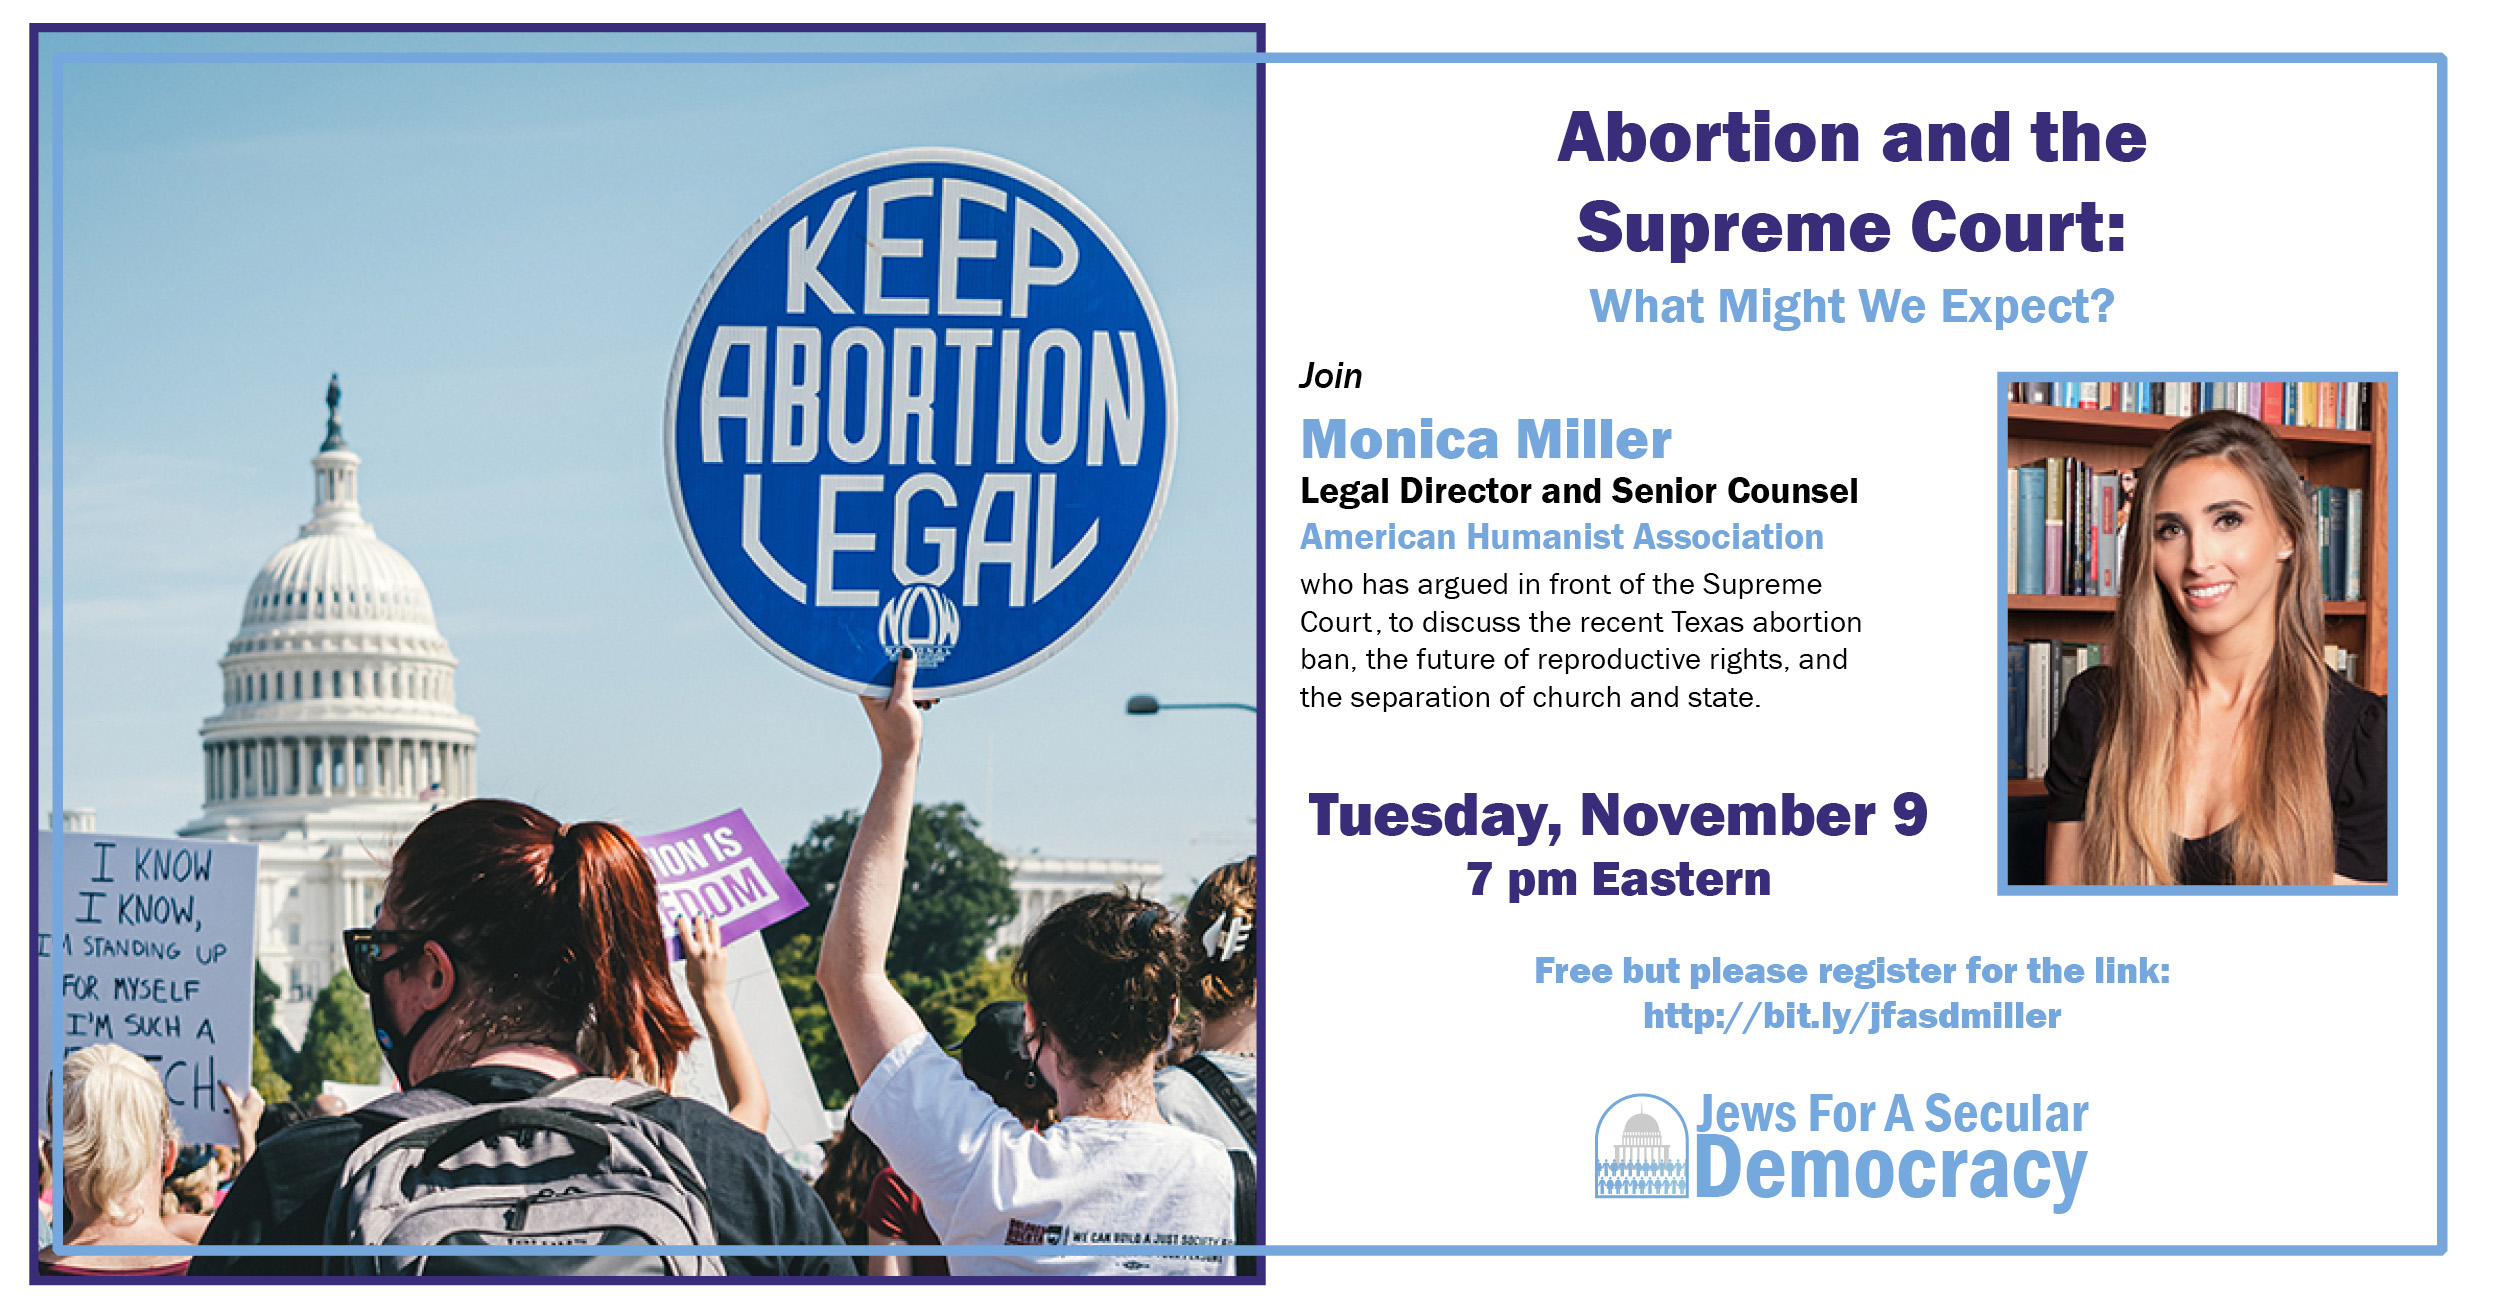 Abortion and the Supreme Court with Monica Miller